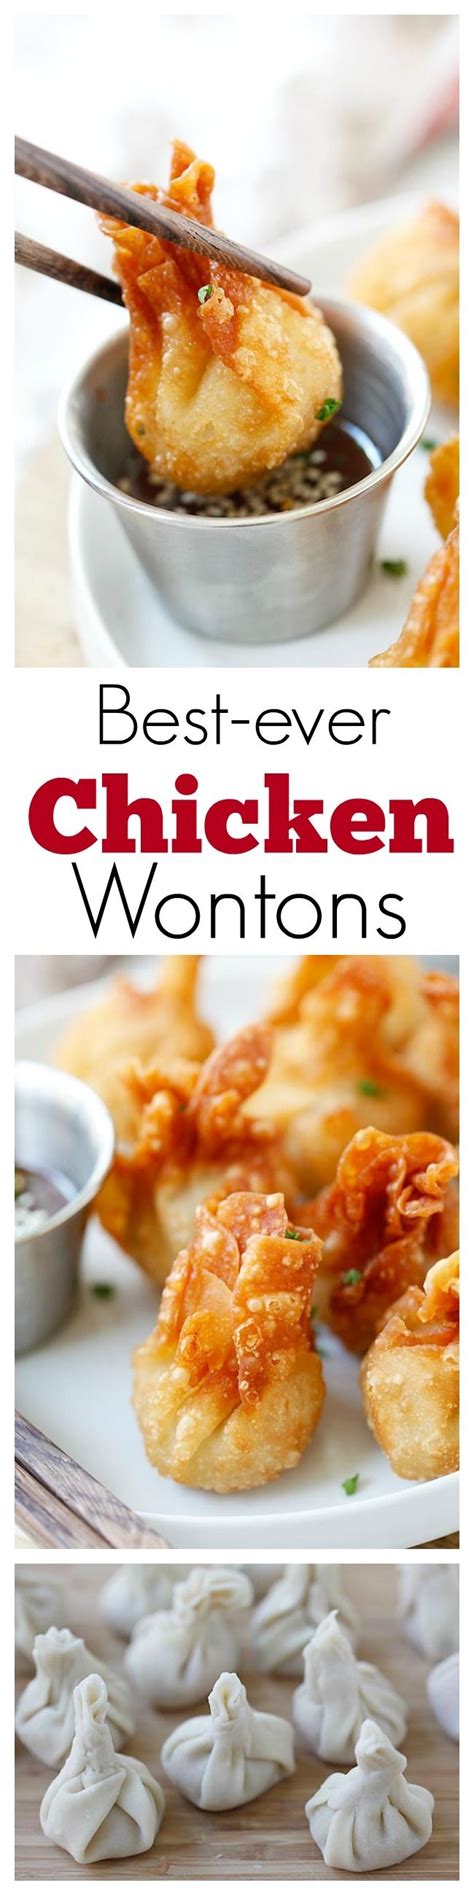 Add the water and cook until evaporated. Chicken Wontons | Recipes, Yummy food, Food